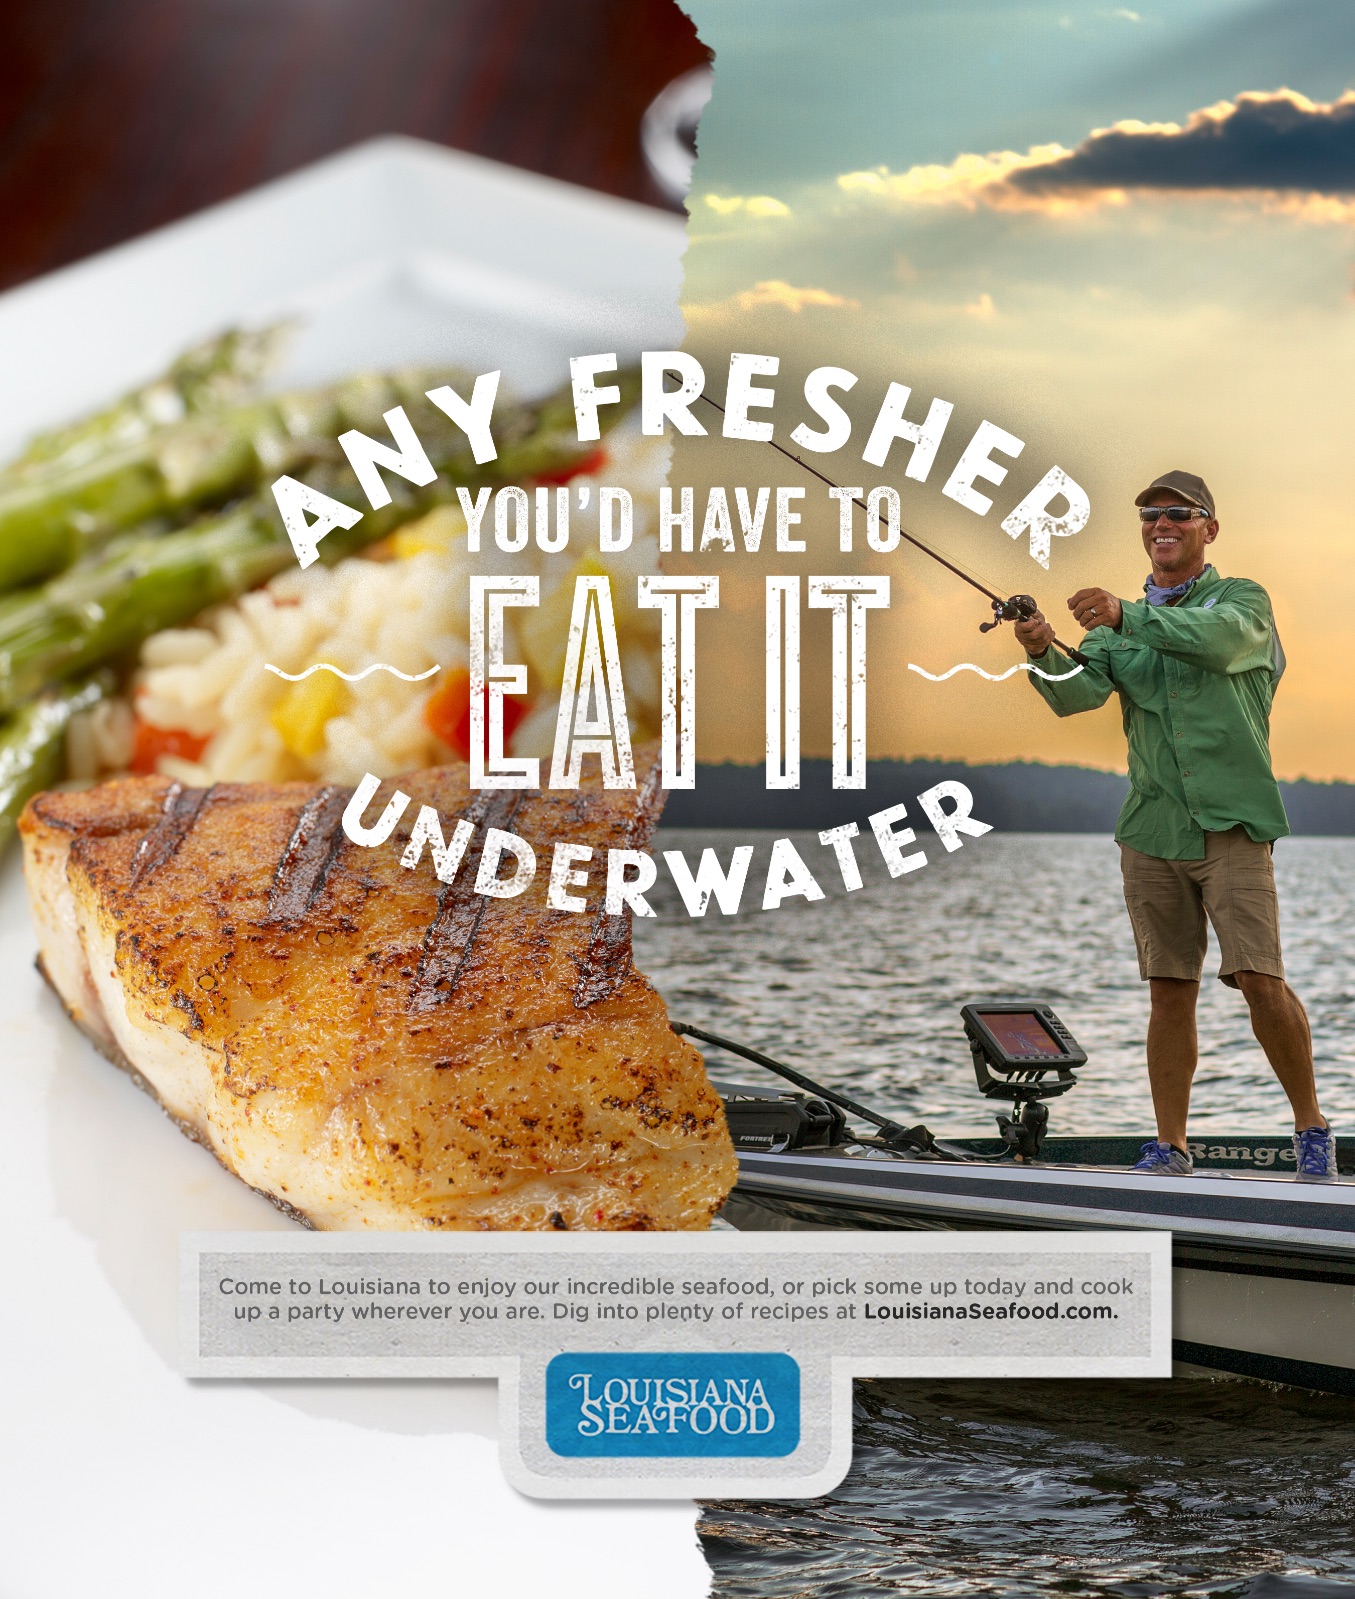 ad for louisiana seafood featuring half of ad with man fishing and other half of ad with fish on dinner plate